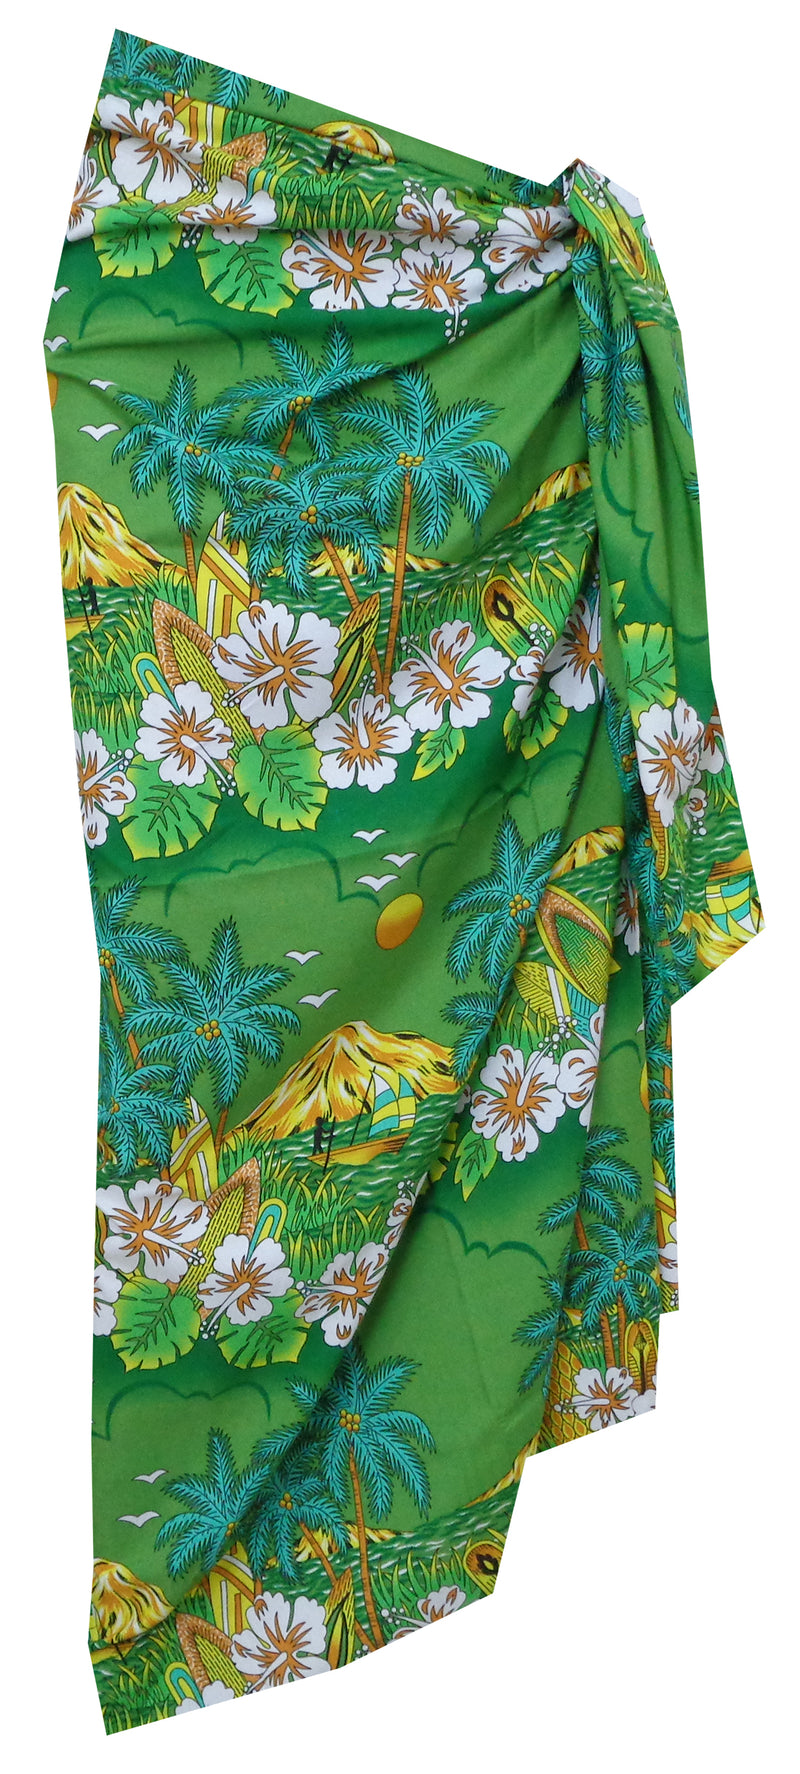 sarong coverups for women Flower Leaf Beach Swimsuit Wrap Plus Size Pareo